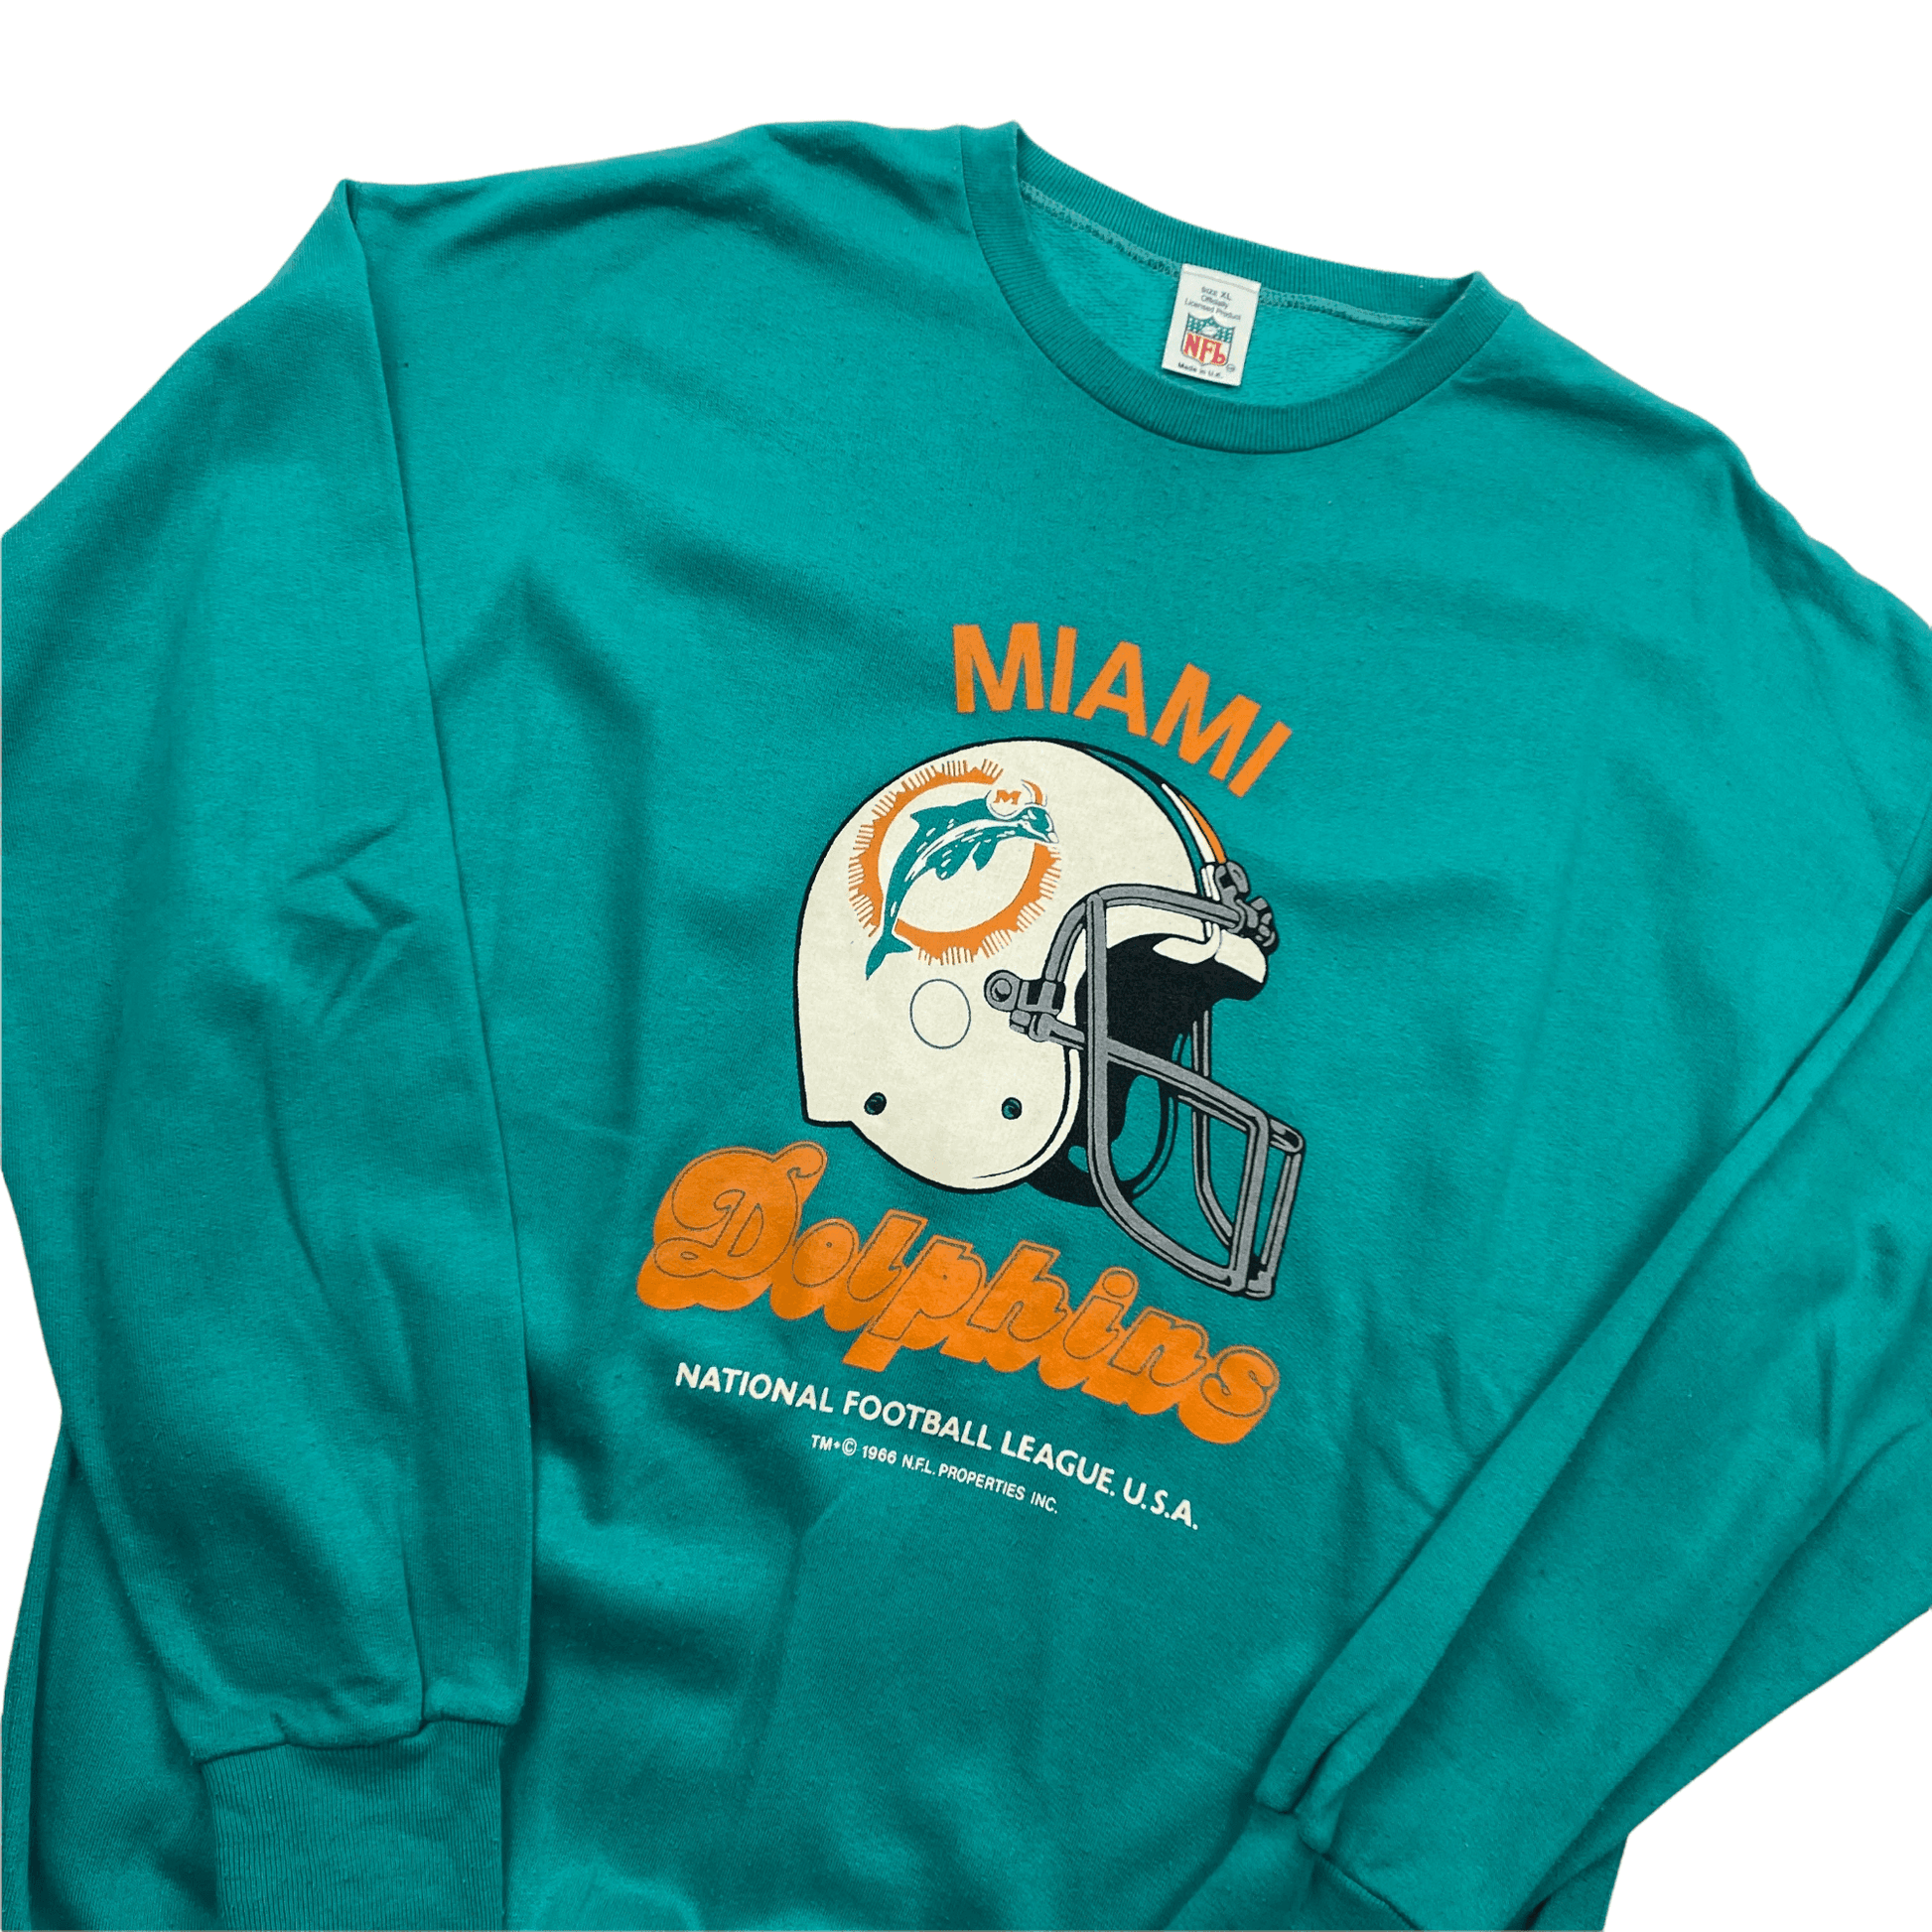 Vintage 60s Blue NFL Miami Dolphins Spell-Out Sweatshirt - Extra Large - The Streetwear Studio